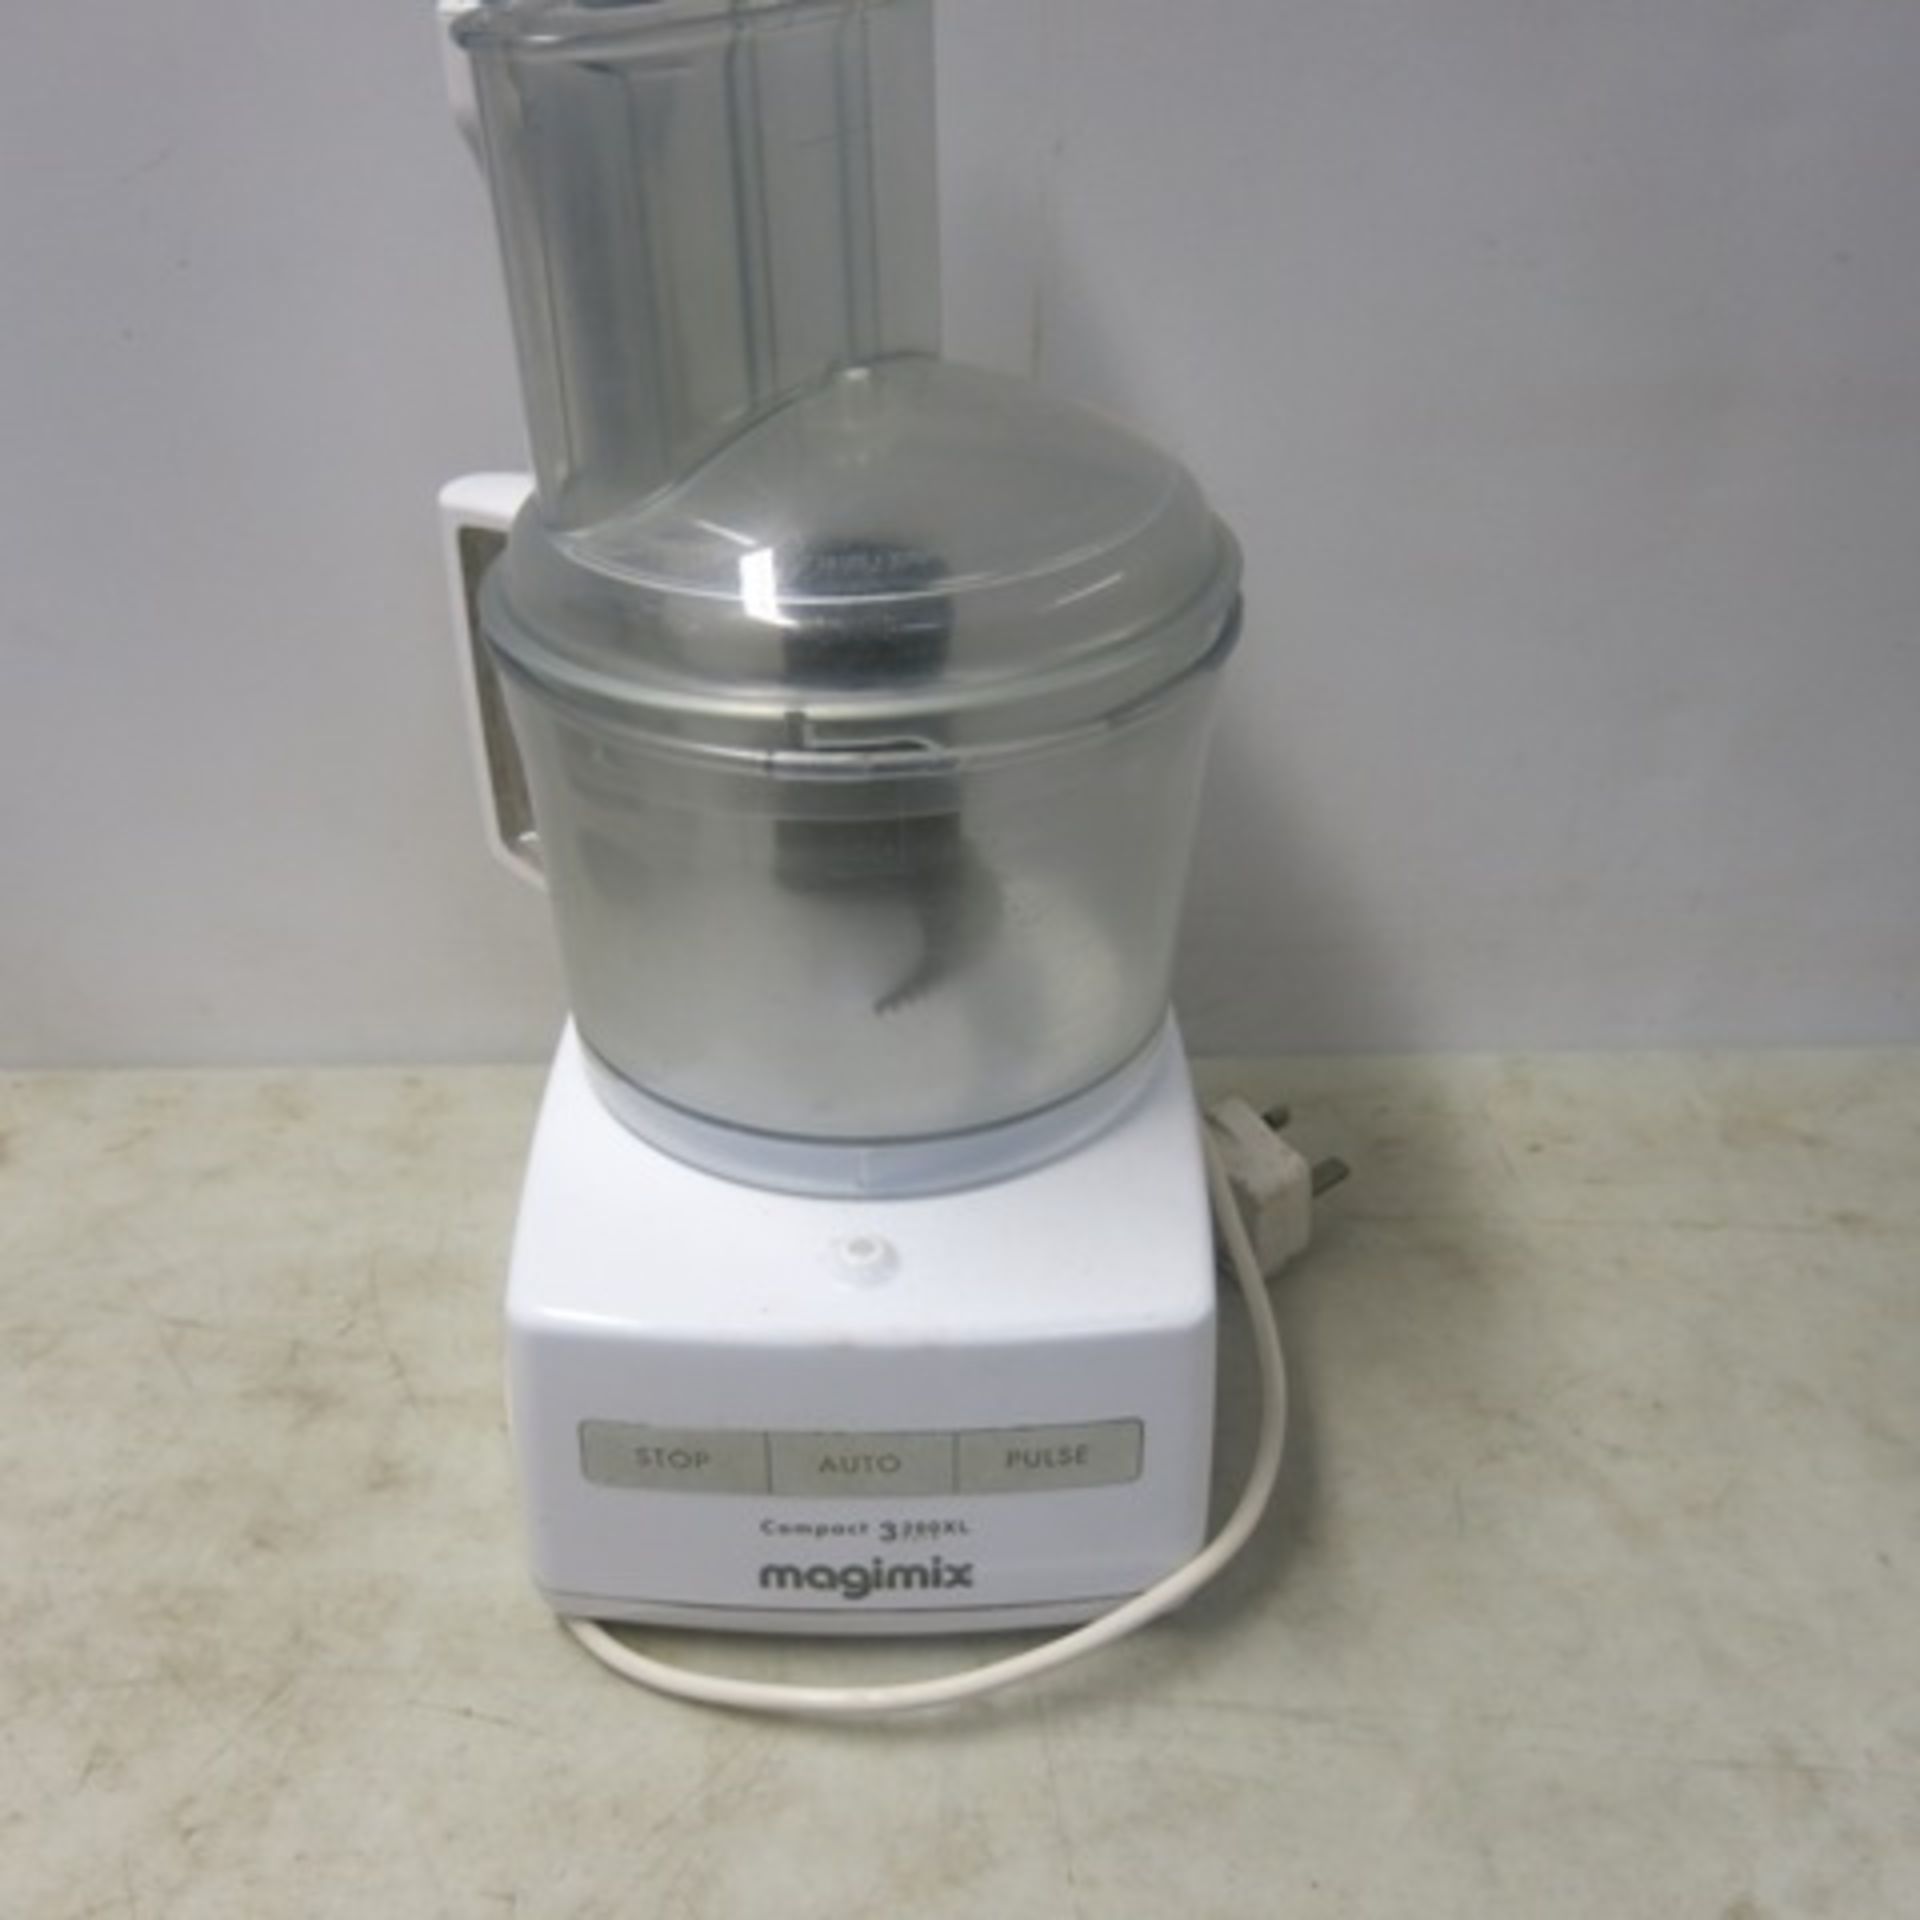 Lot of Kitchen Equipment to Include: 1 x Magimix Compact 300xl Food Processor, 1 x Imperia Pasta - Image 5 of 9